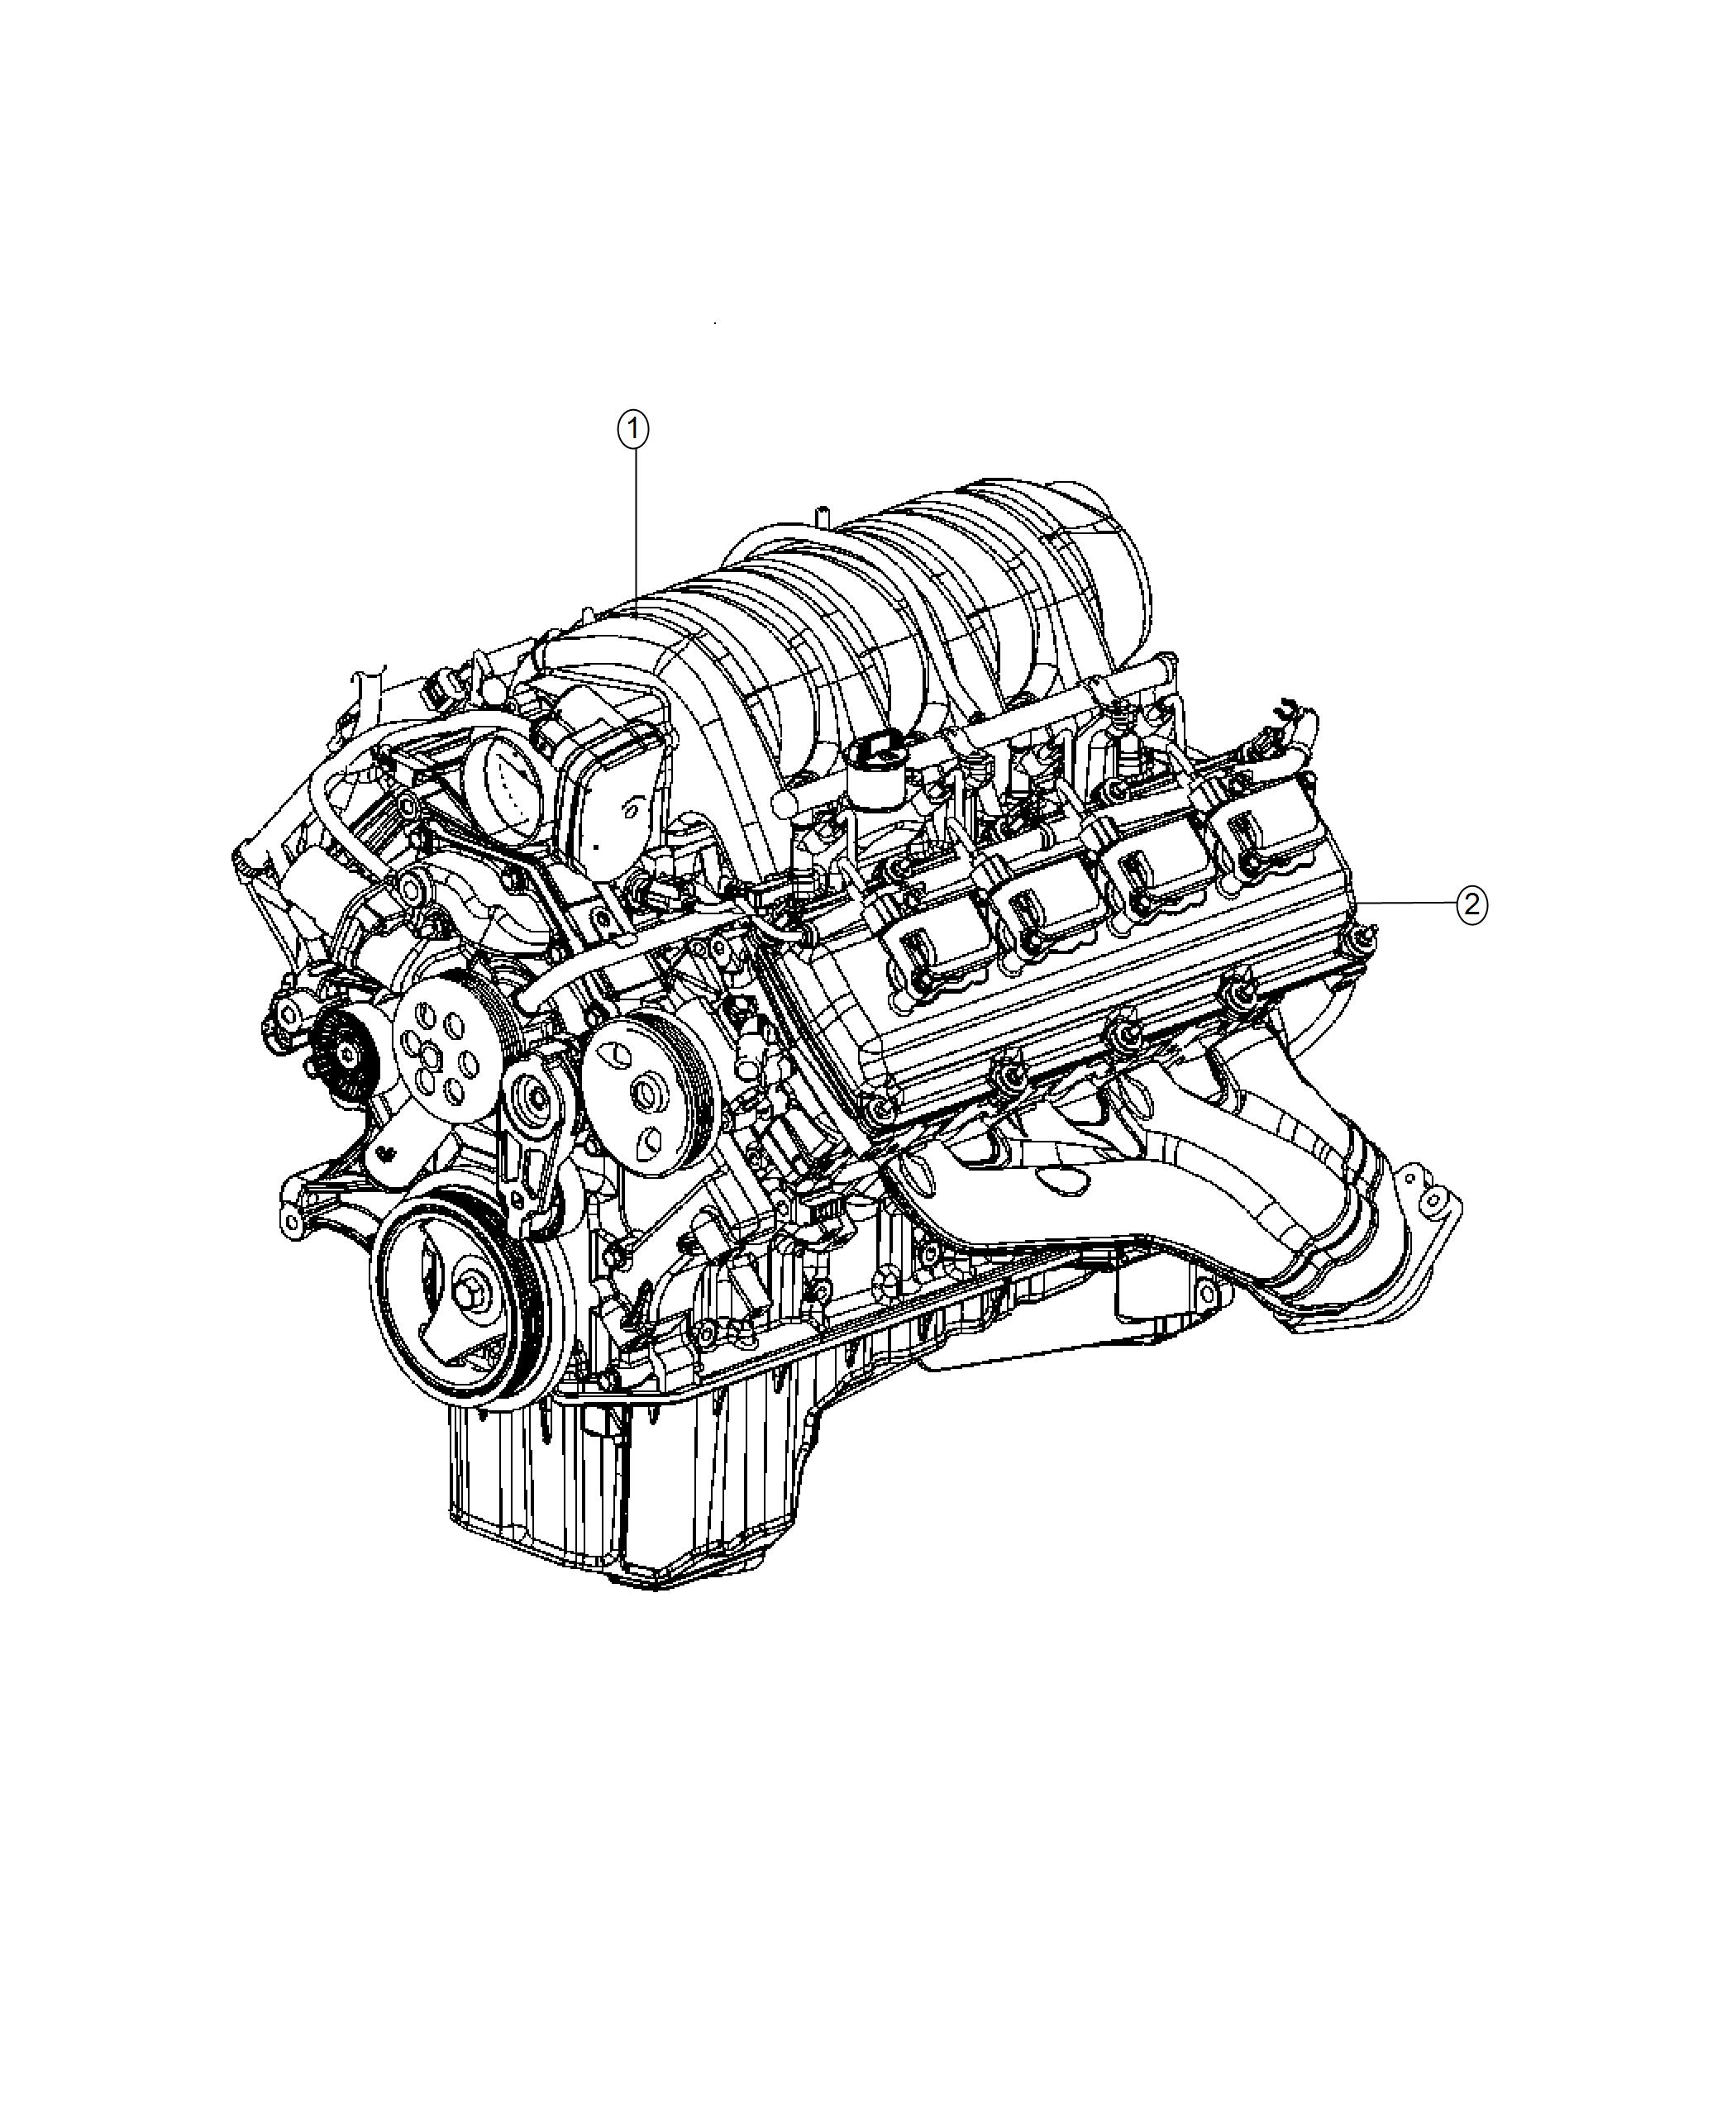 Engine Assembly And Service Engine Long Block 6.4L. Diagram